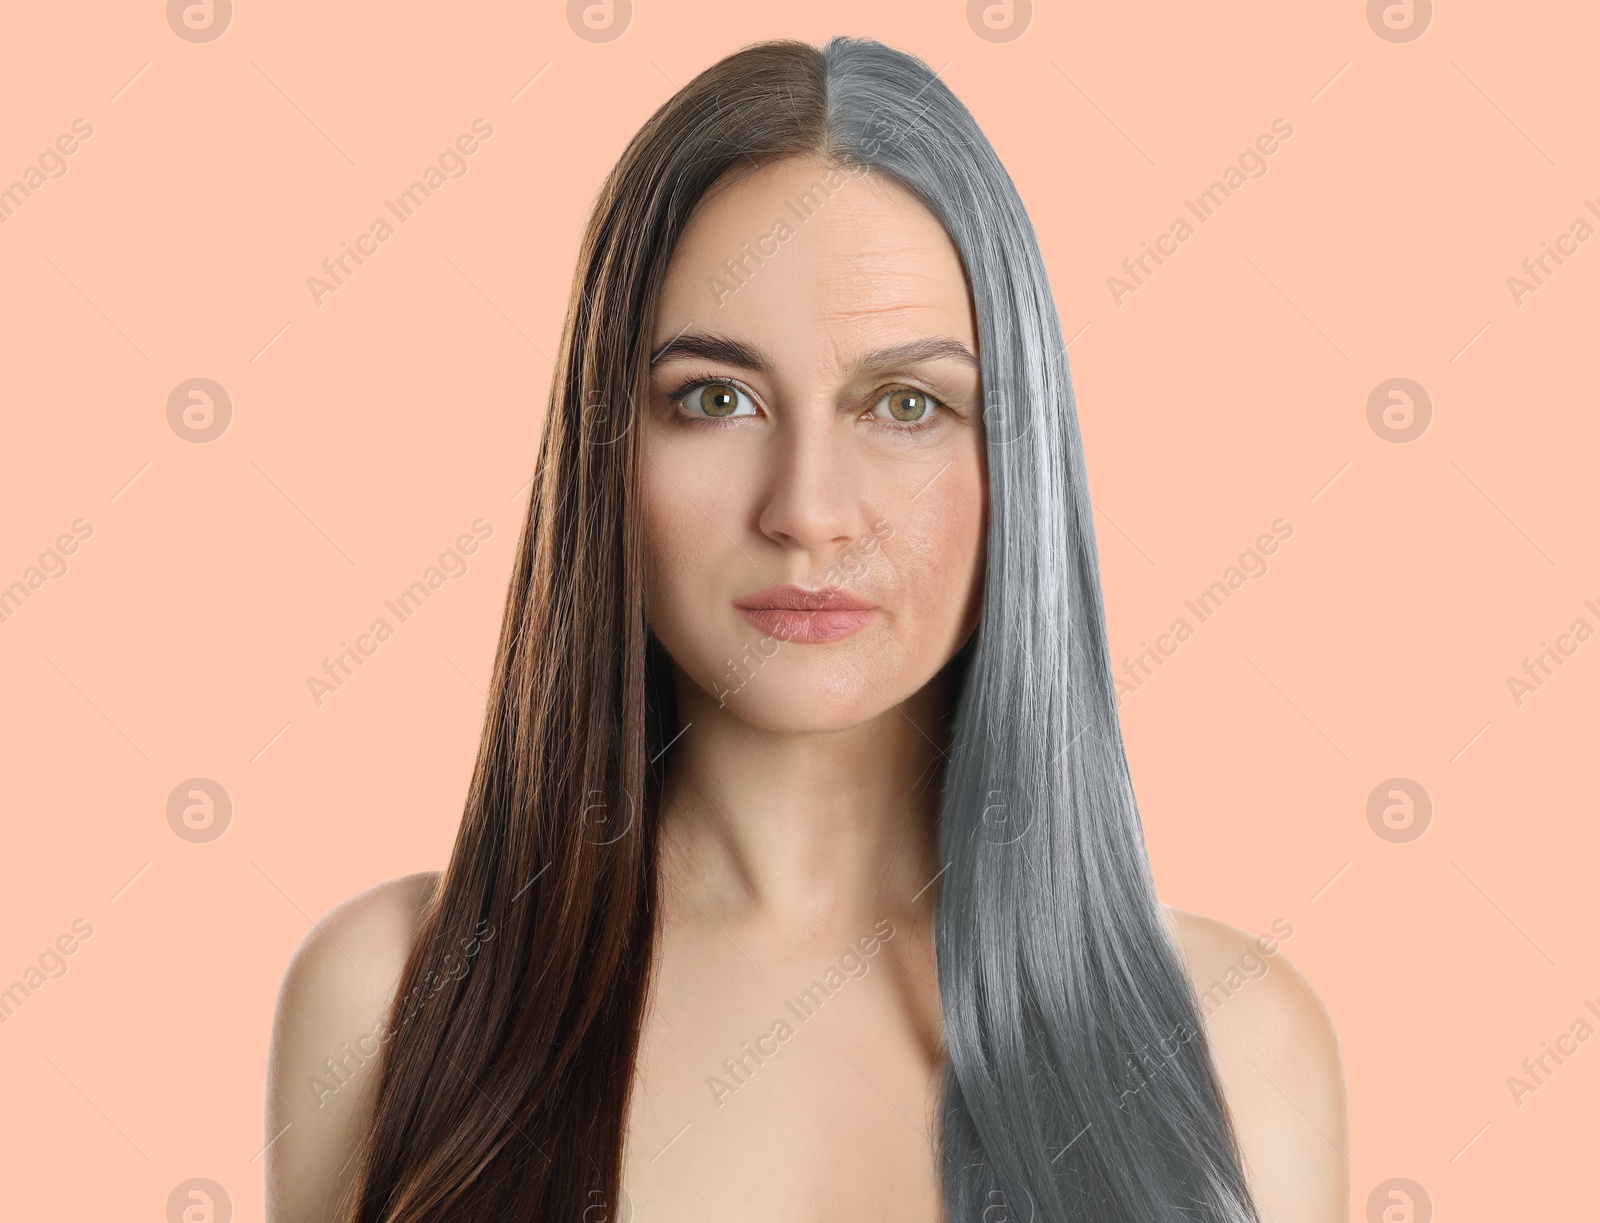 Image of Natural aging, comparison. Portrait of woman in young and old ages on beige background